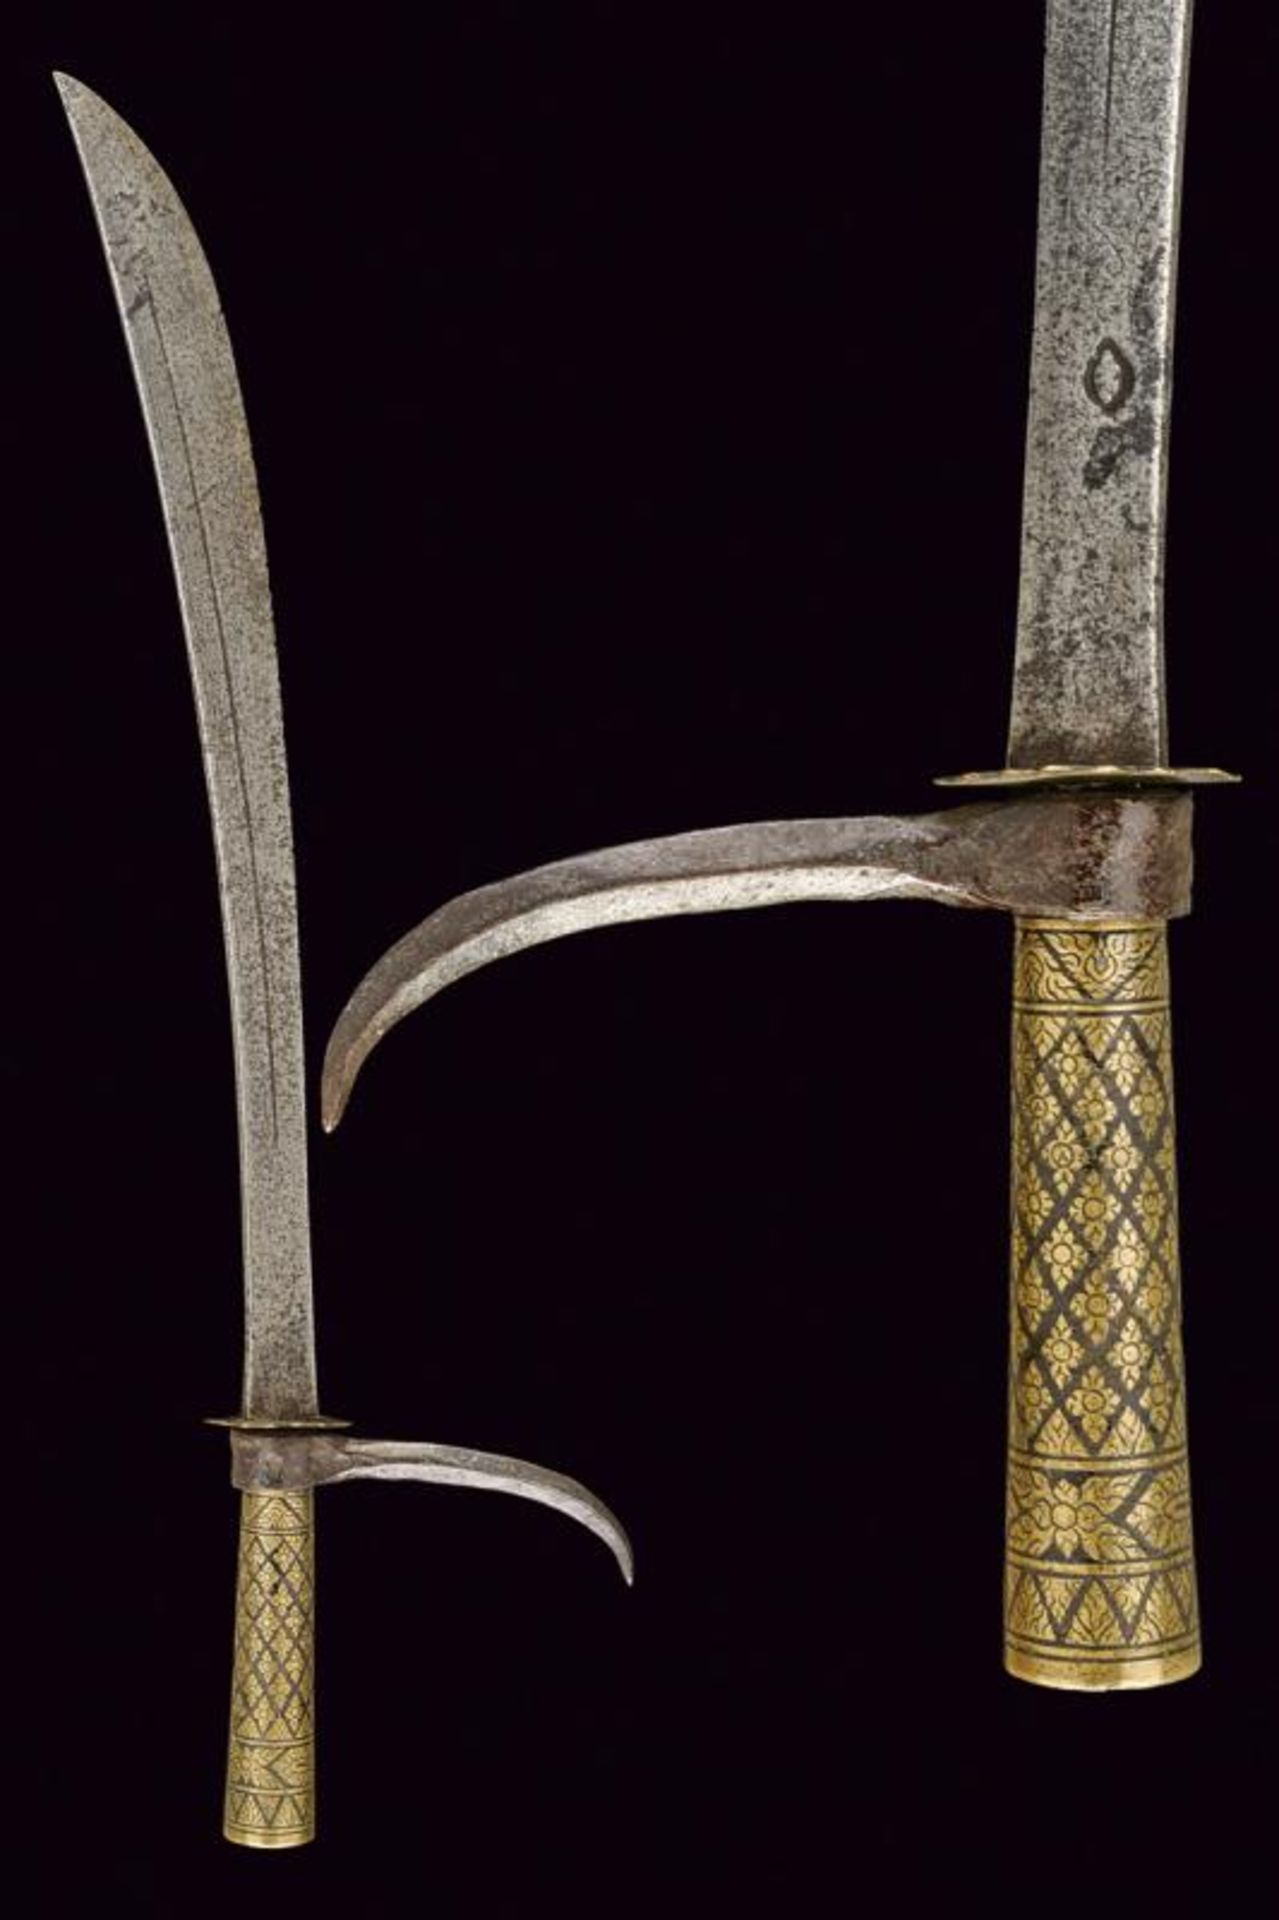 An Ankus with sabre blade